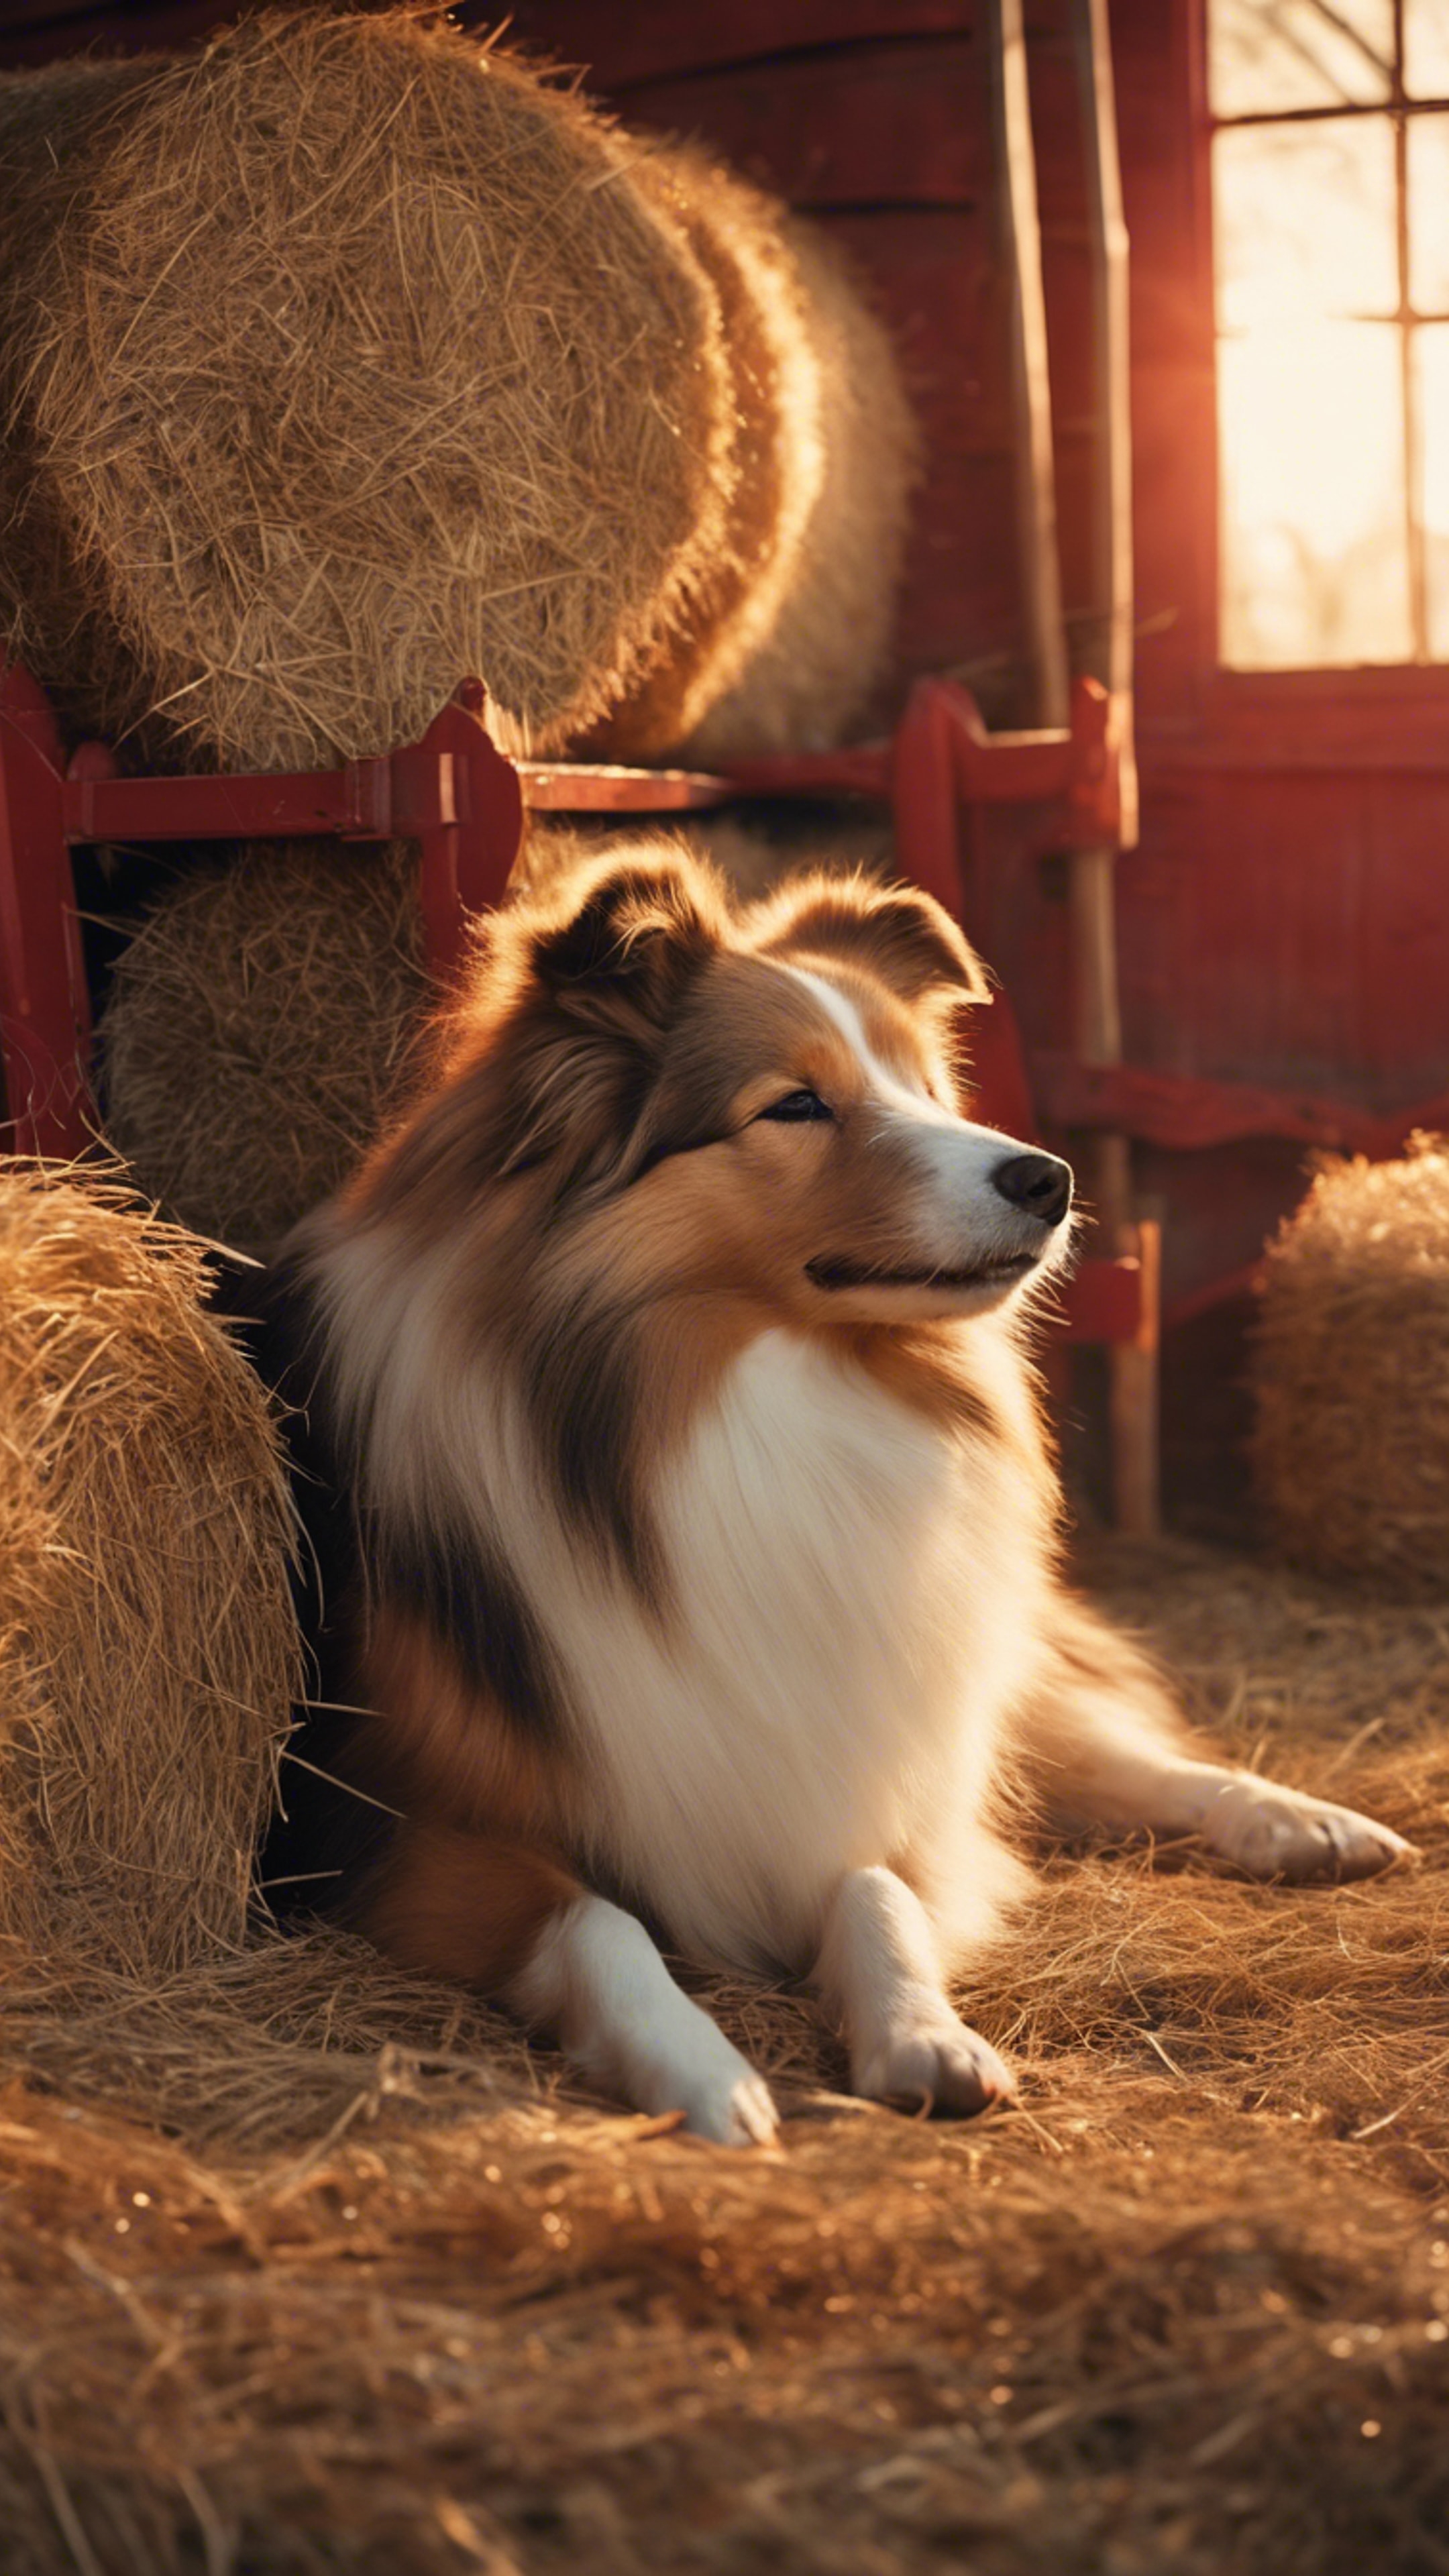 A Shetland Sheepdog sleeping in a vintage red barn, surrounded by hay balls and a setting sun. 벽지[4b8e09167f2043c5830e]